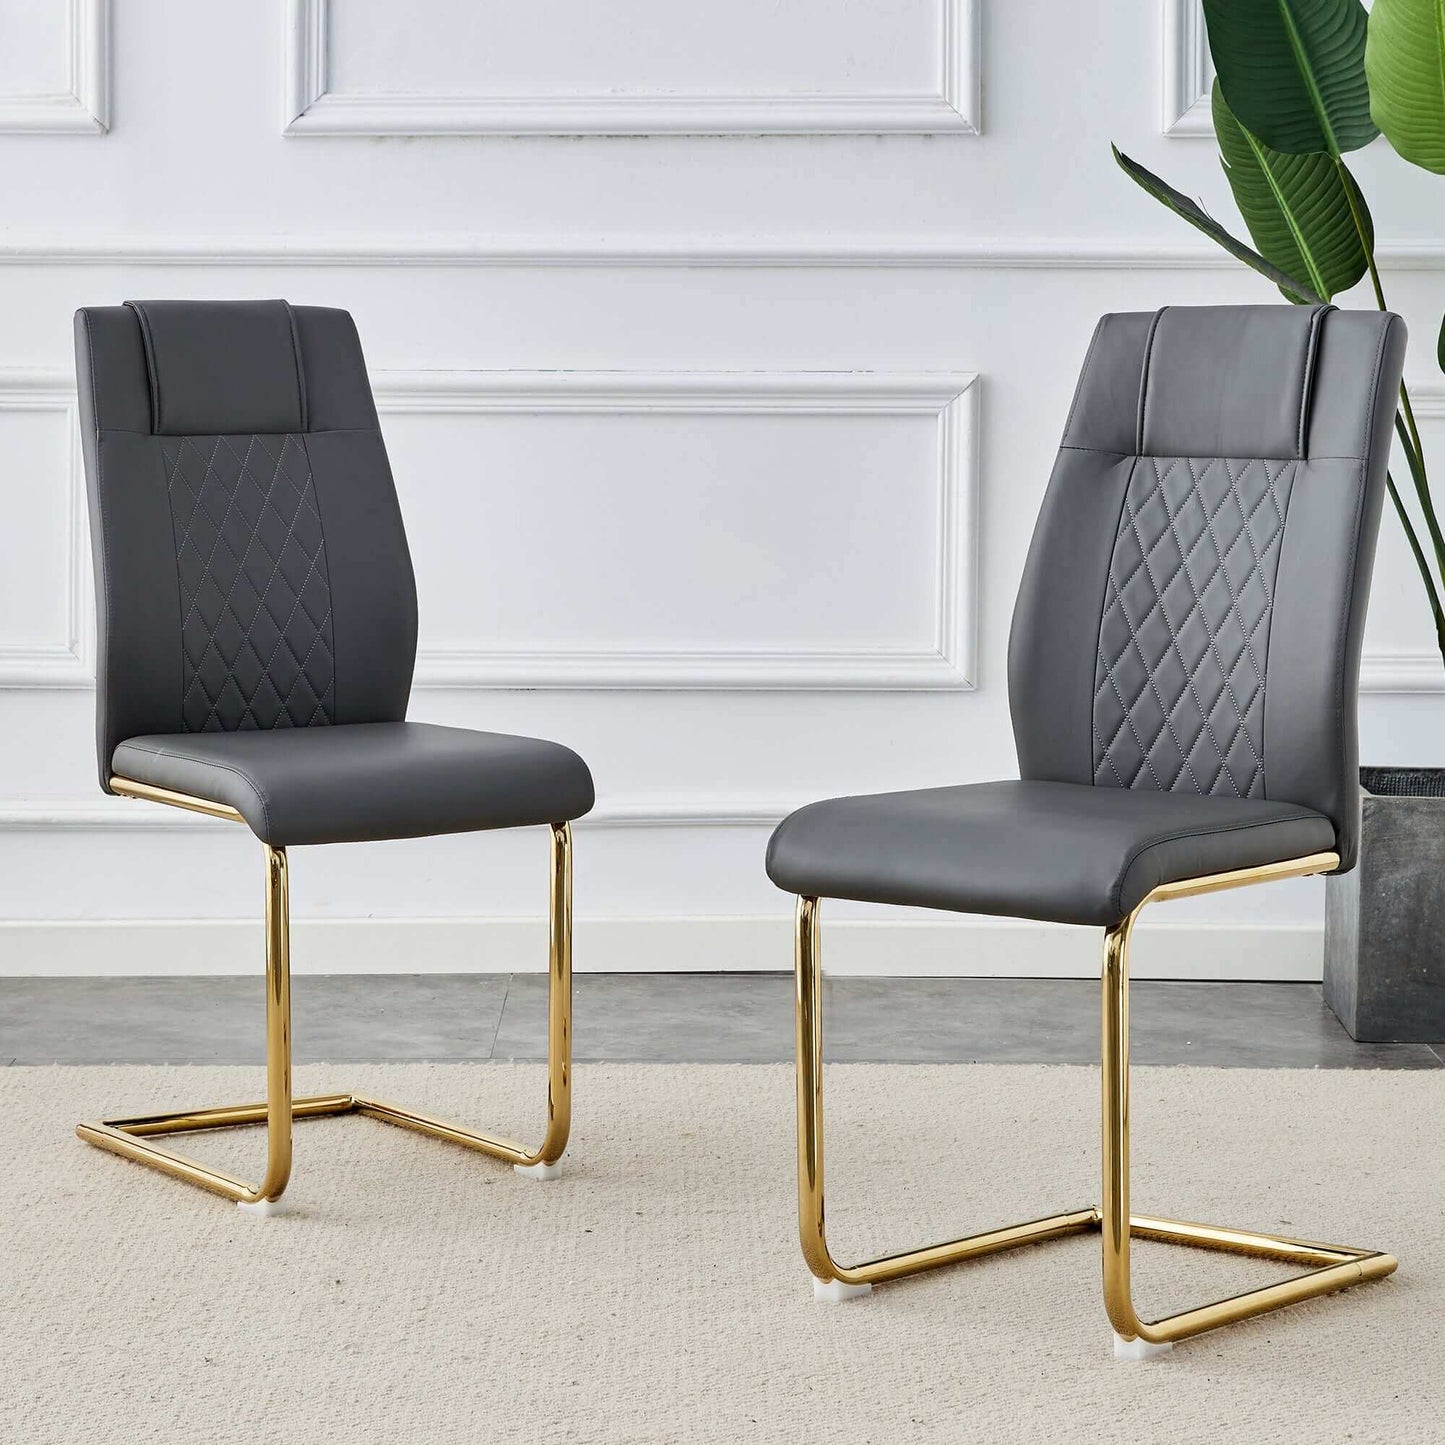 Modern dining chairs, restaurant / office chairs; Set of 4 pieces